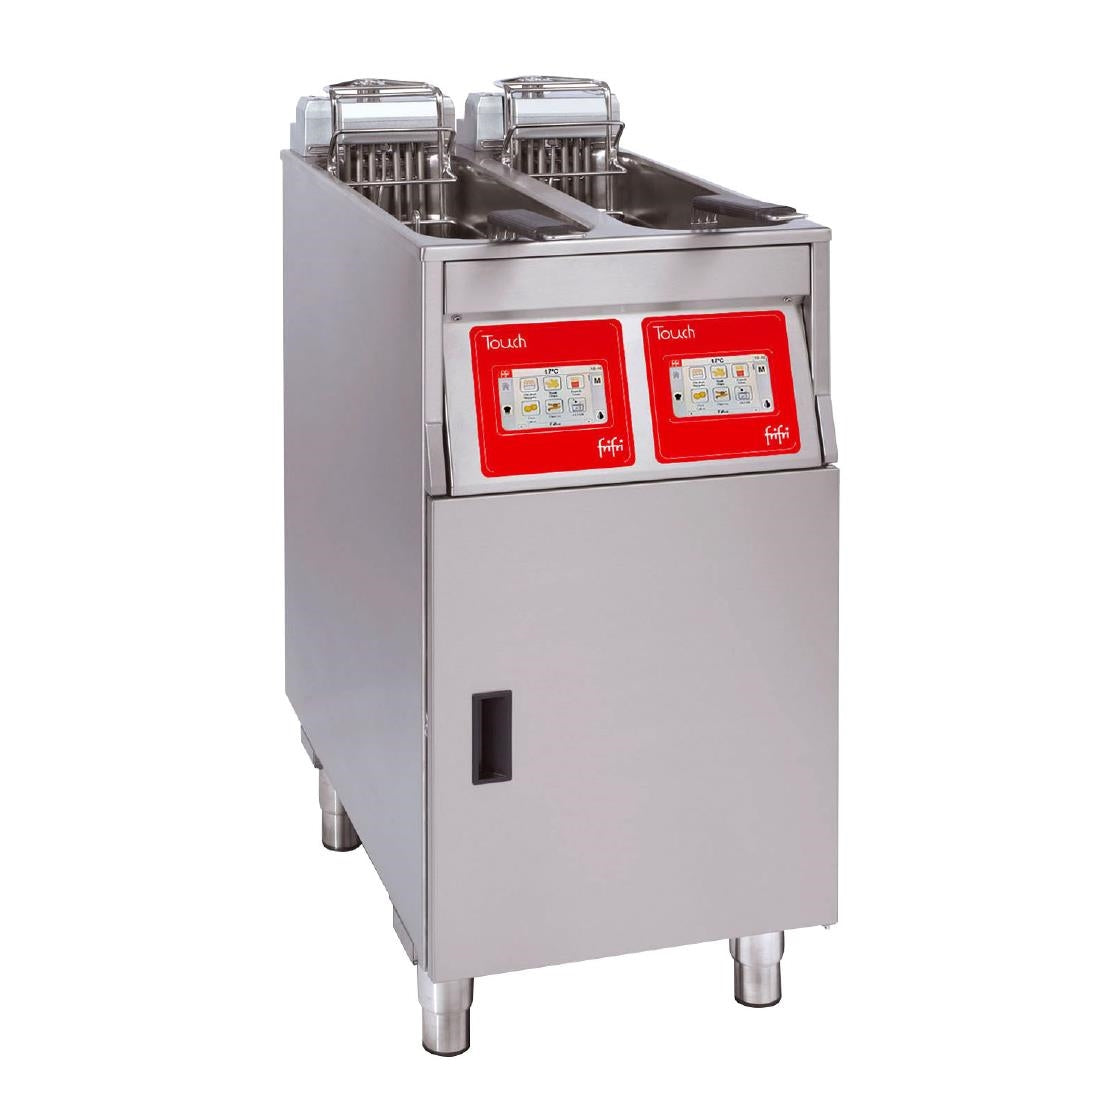 HS014-3PH FriFri Touch 422 Electric Free-Standing Twin Tank Fryer 2 Baskets 2x 11kW - Three Phase